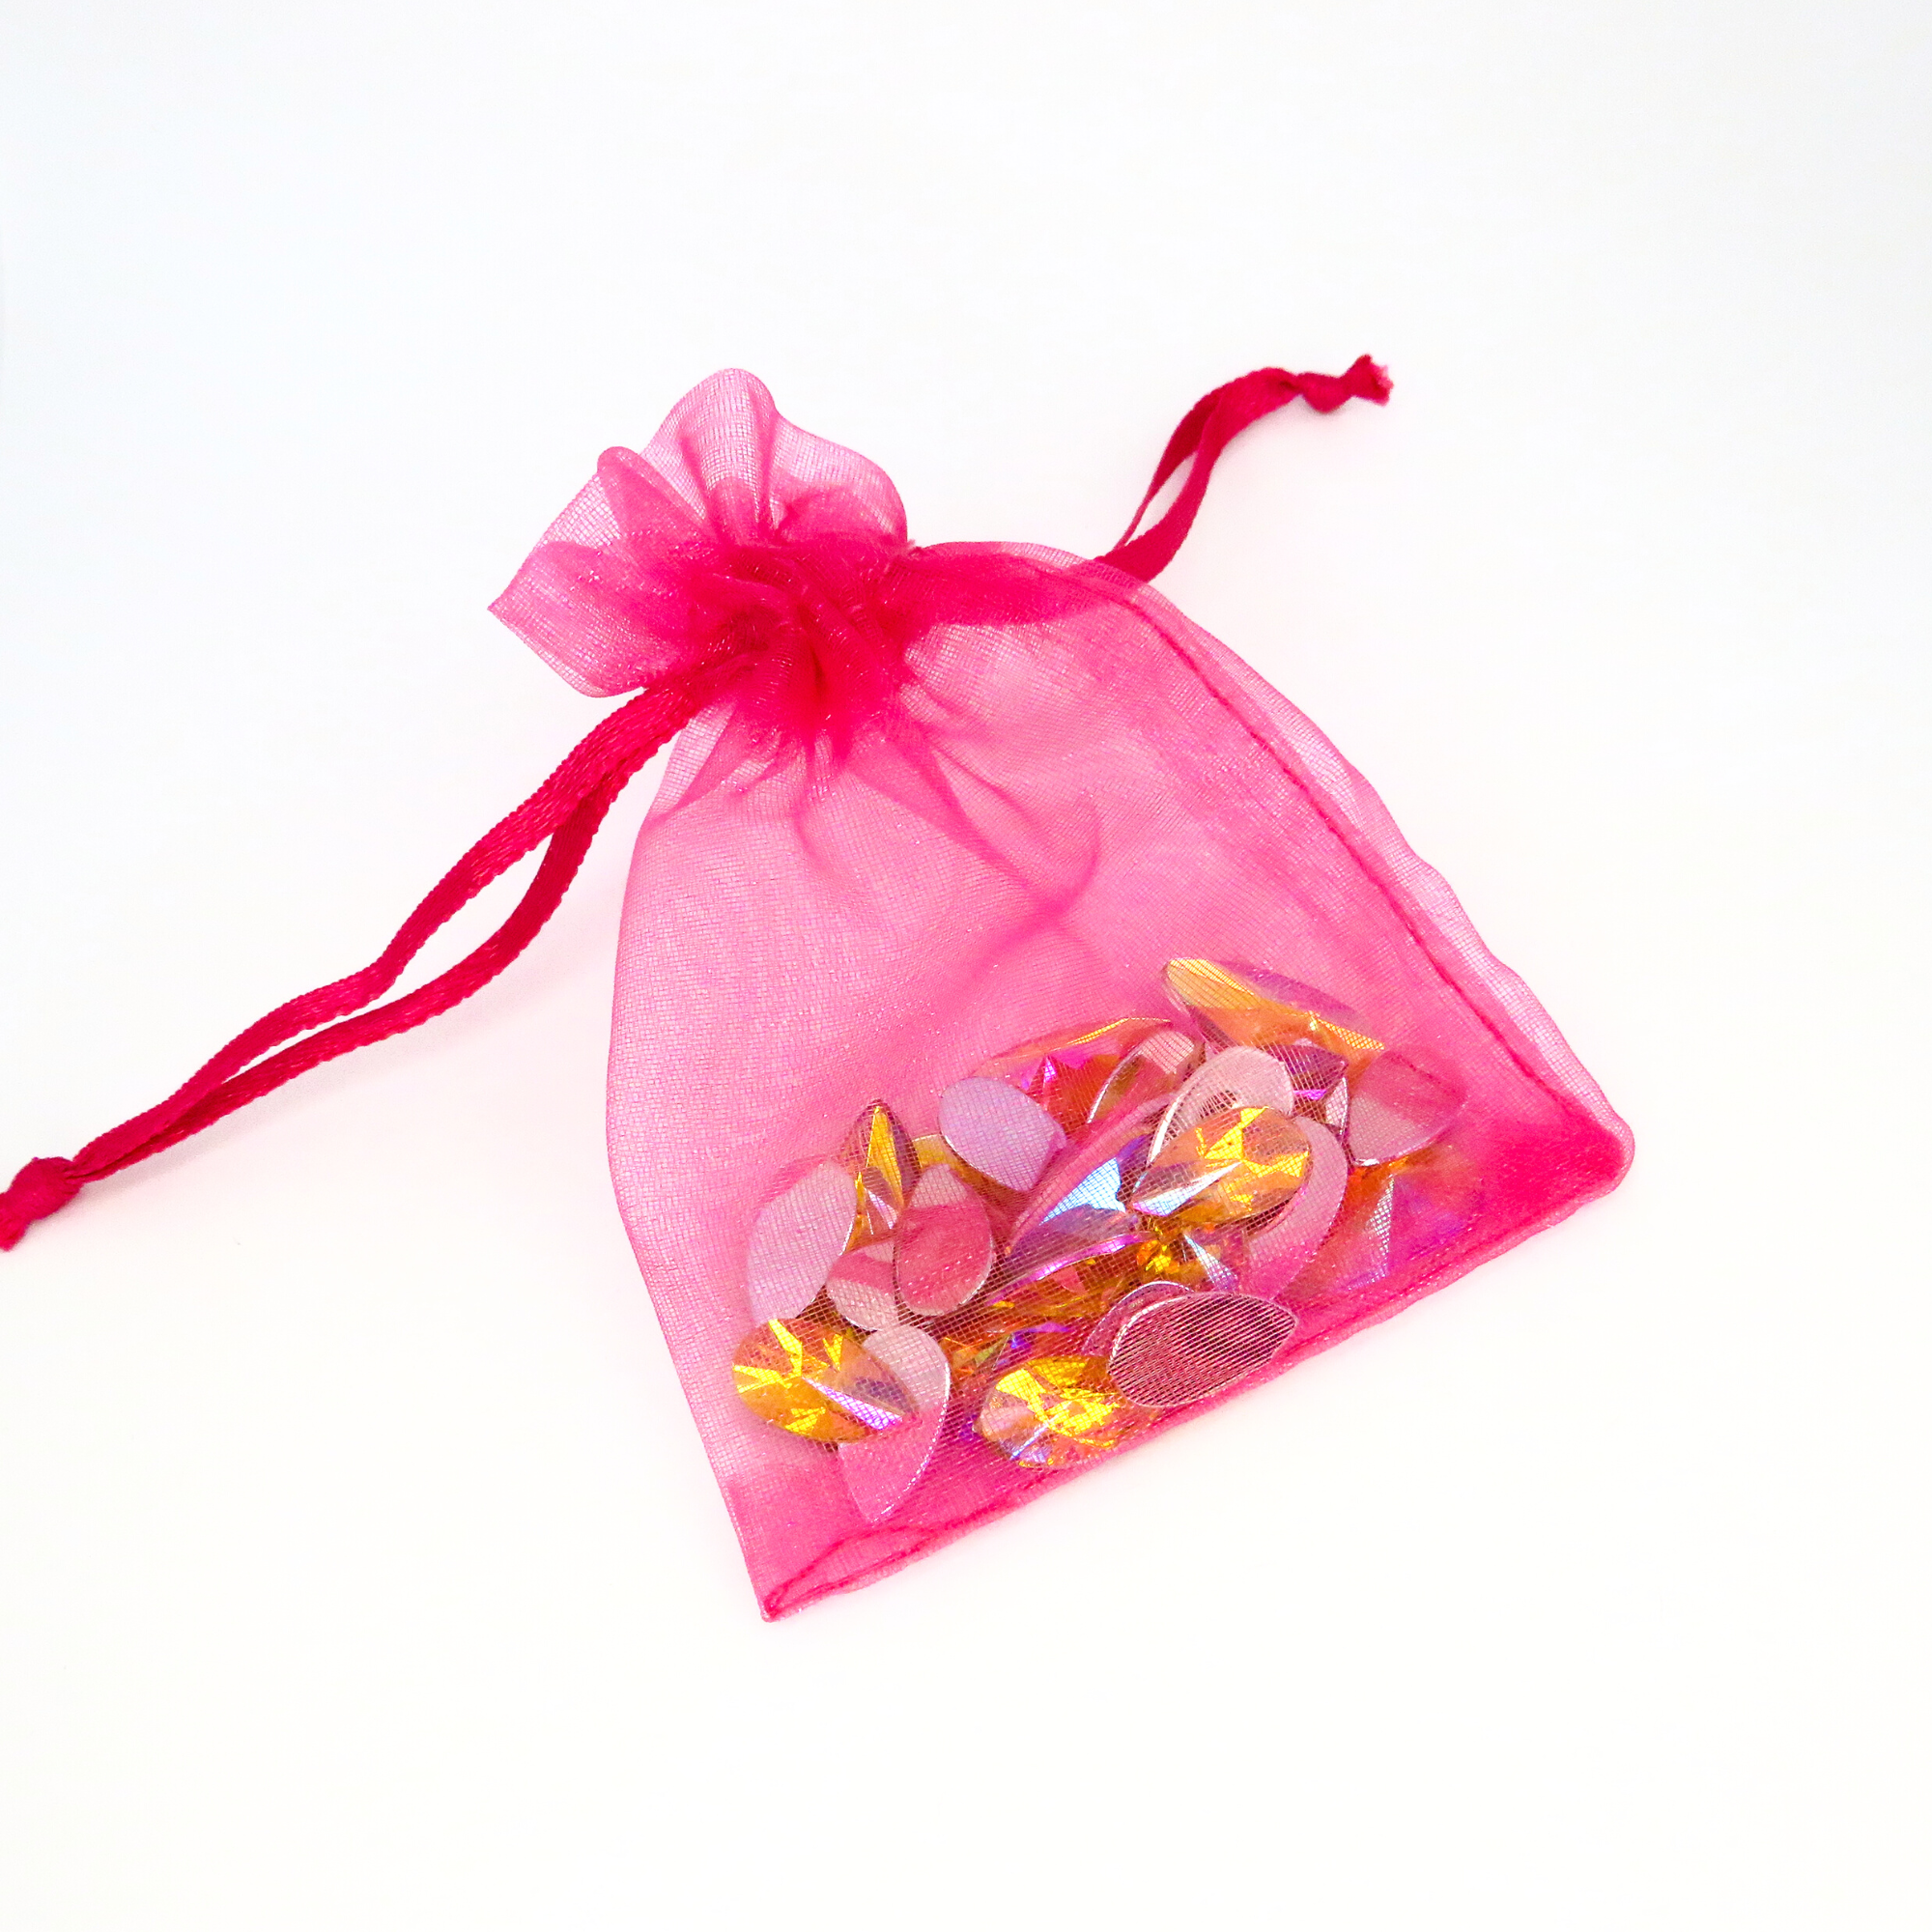 A hot pink organza bag filled with citrine face gems by Luminosity Glitter